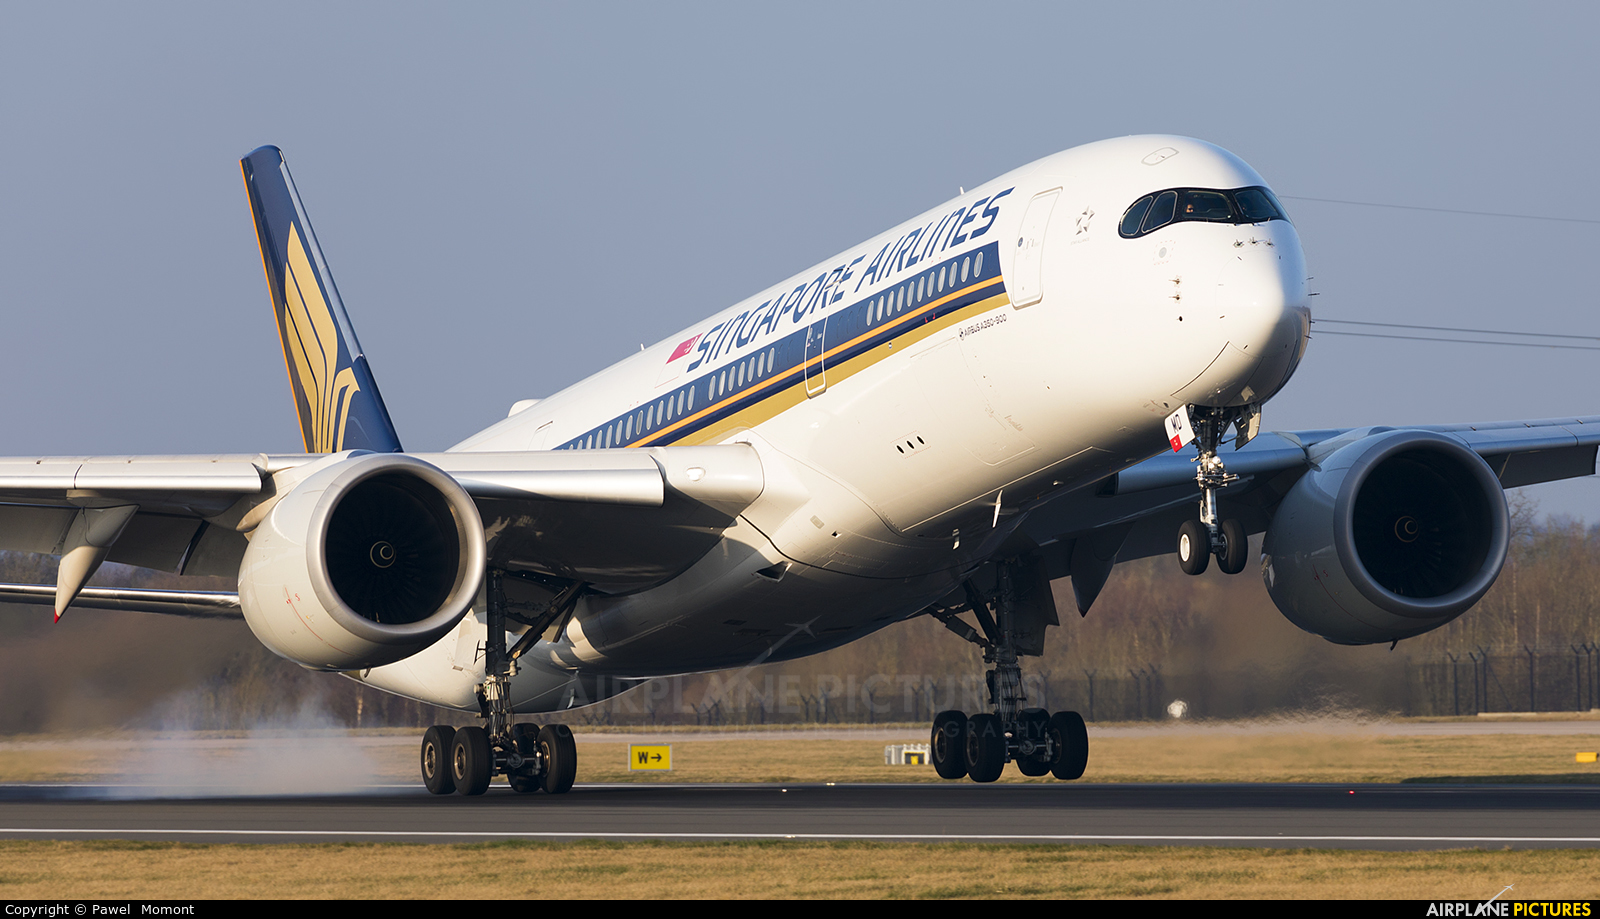 Singapore Airlines 9V-SMD aircraft at Manchester